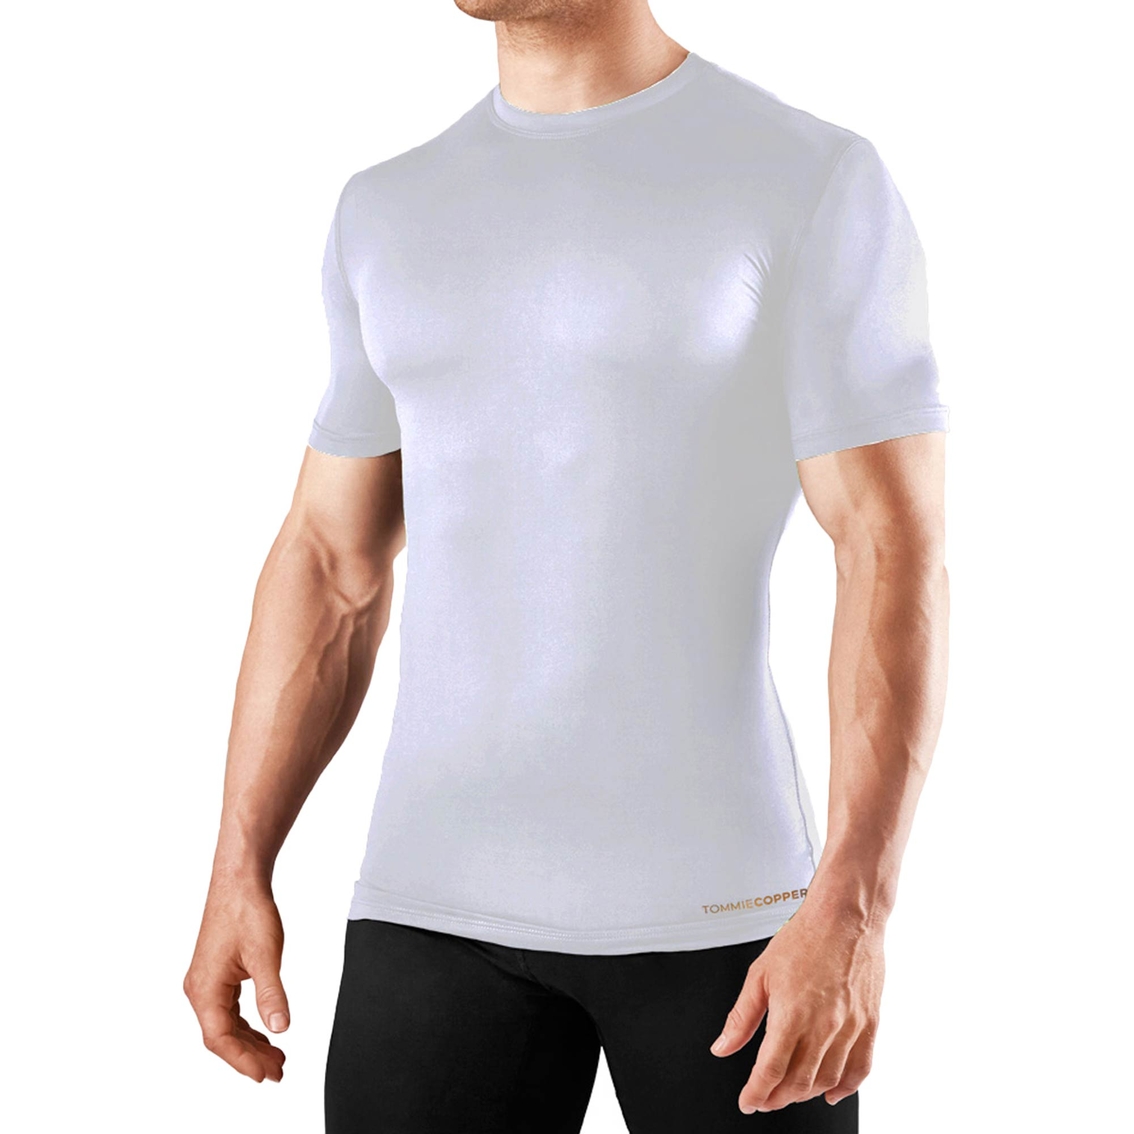 Tommie Copper Crew Compression Shirt | Shirts | Clothing & Accessories ...